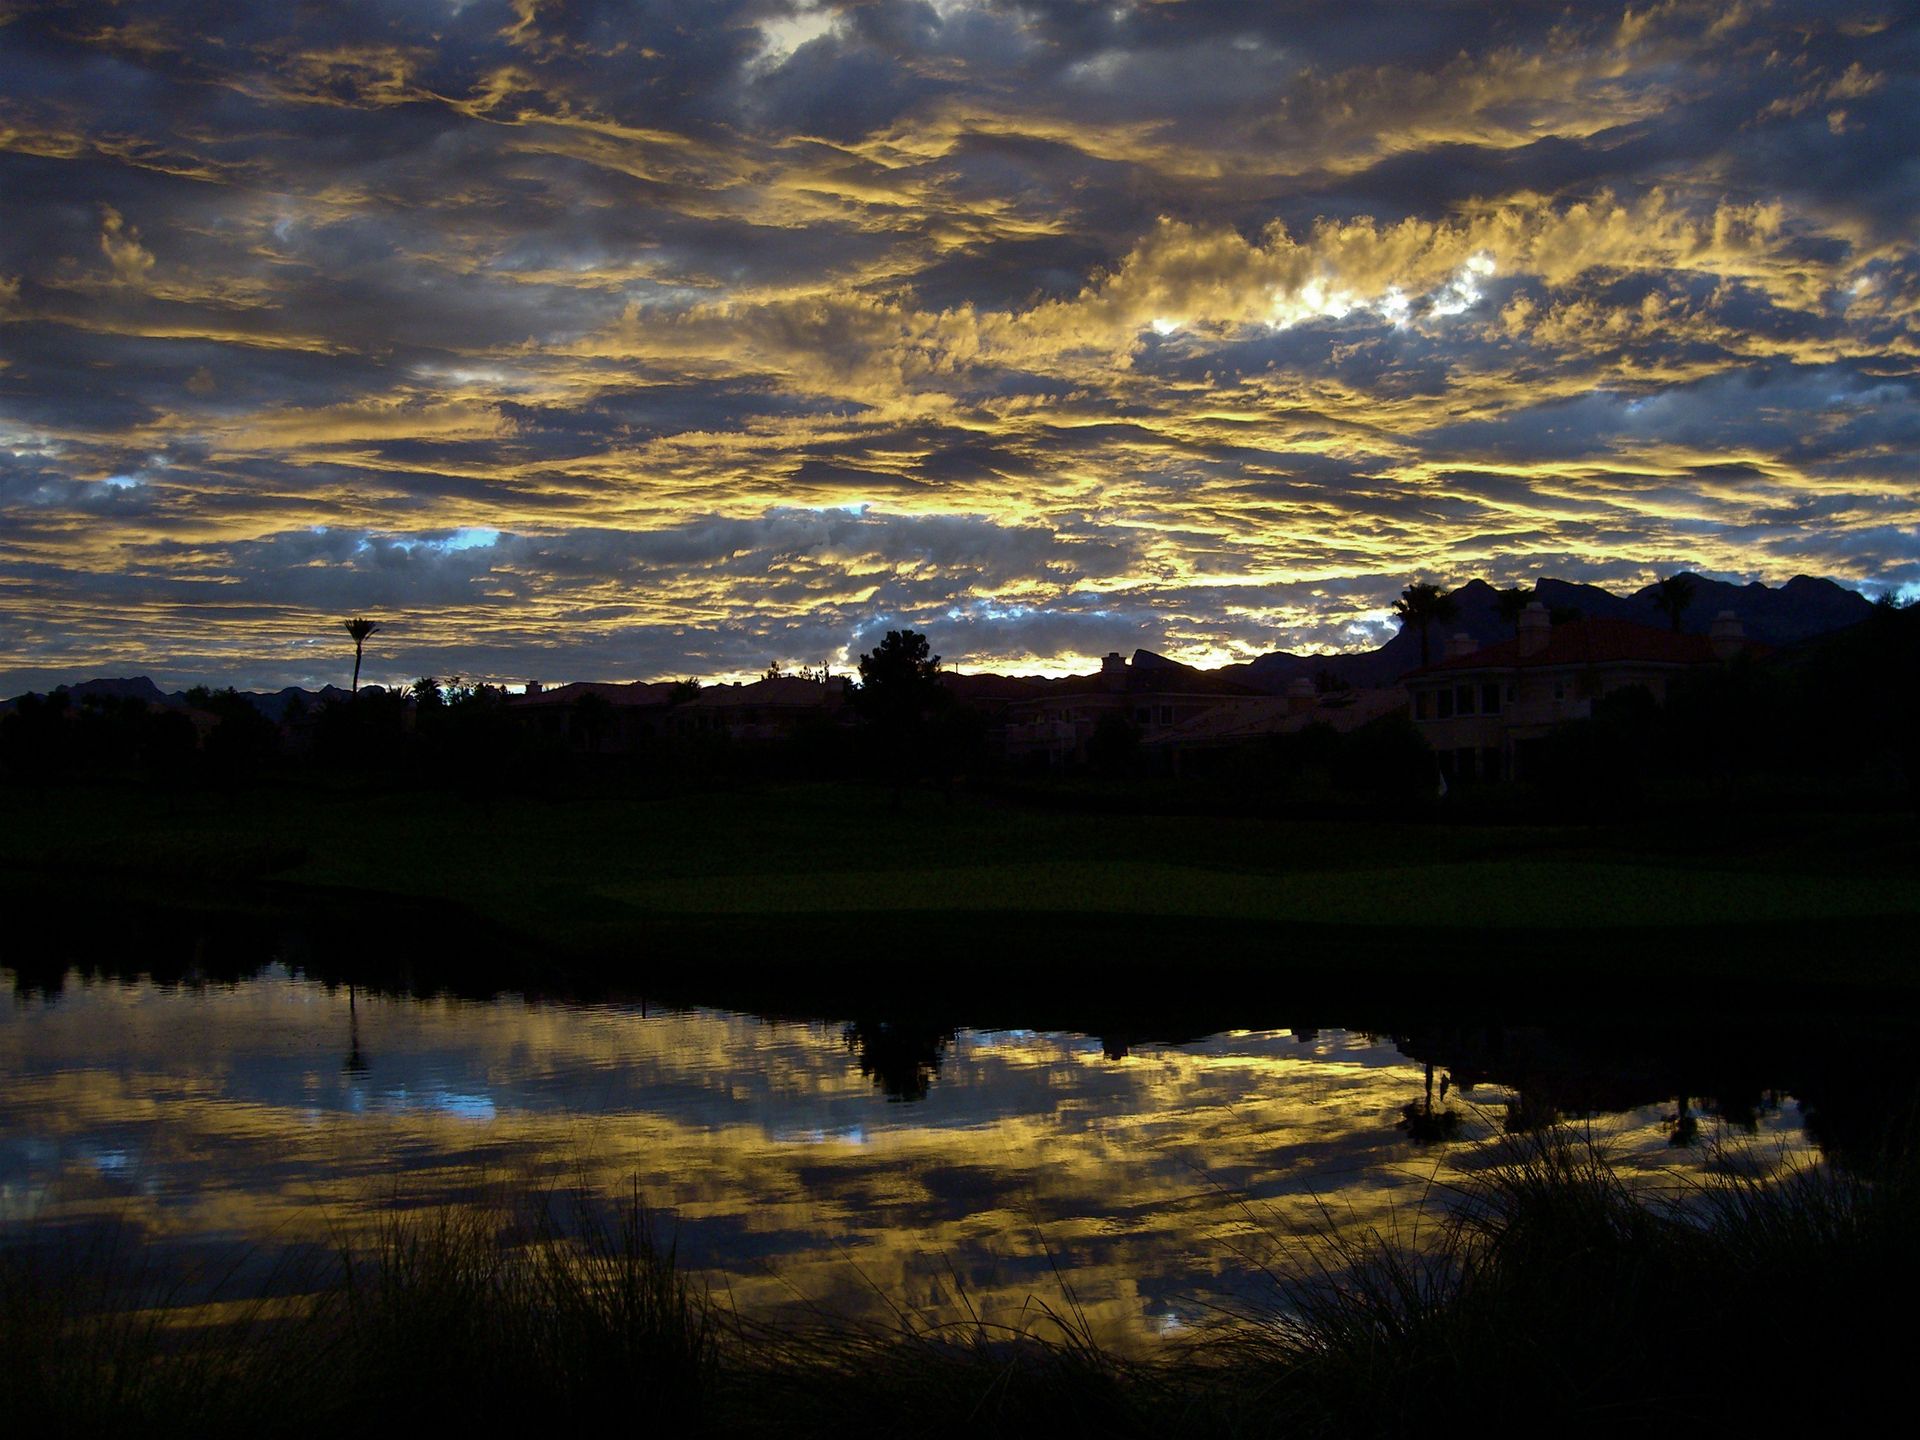 Clouds in the sky are reflected in a pond just after the sunset.